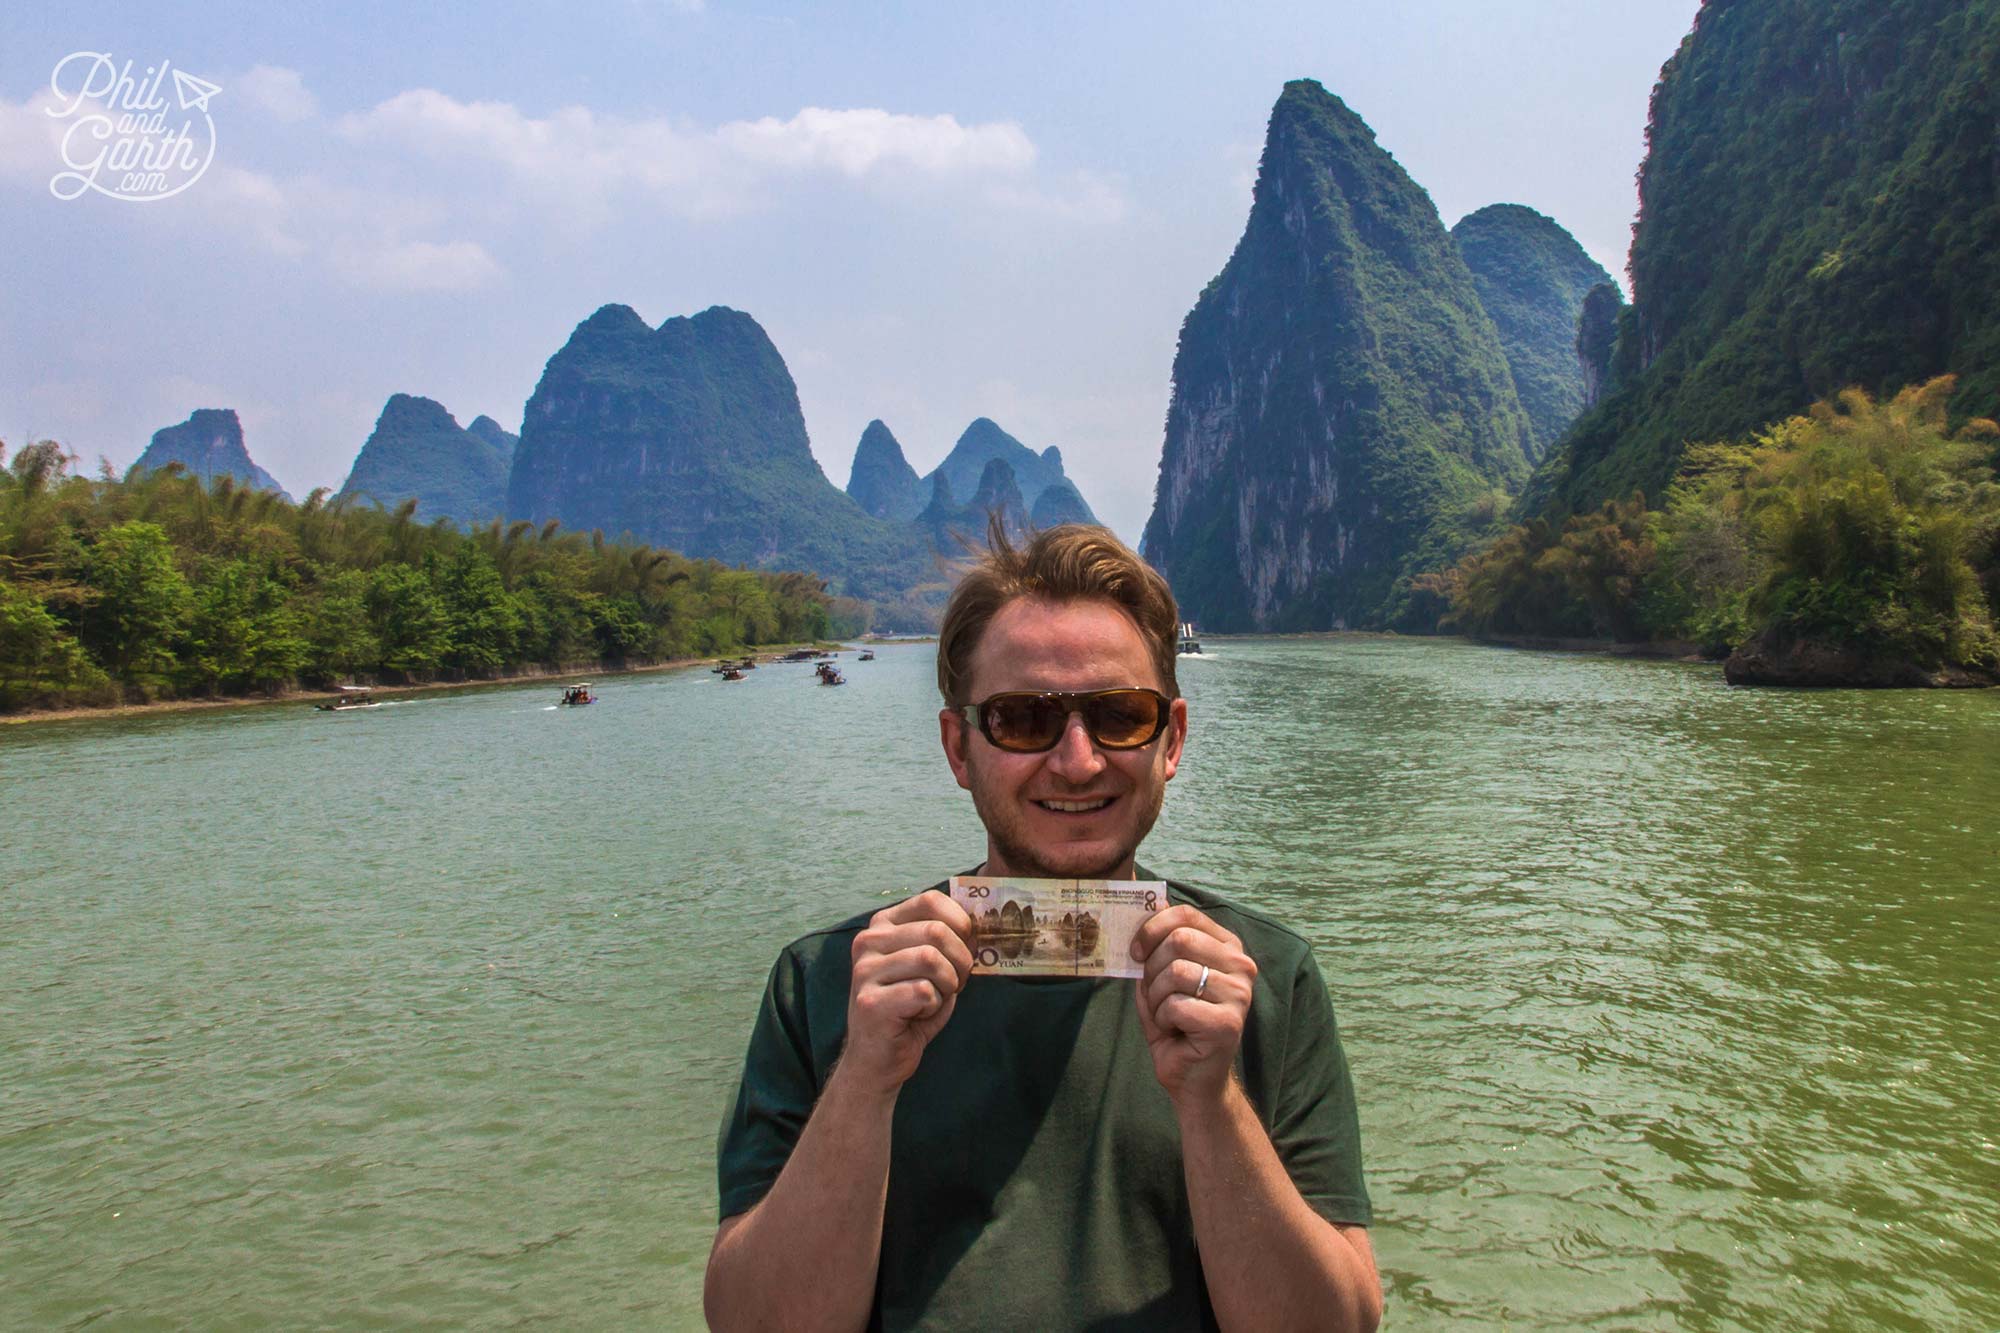 Garth holding a 20 Yuan note passing Xingping, the location featured on the banknote